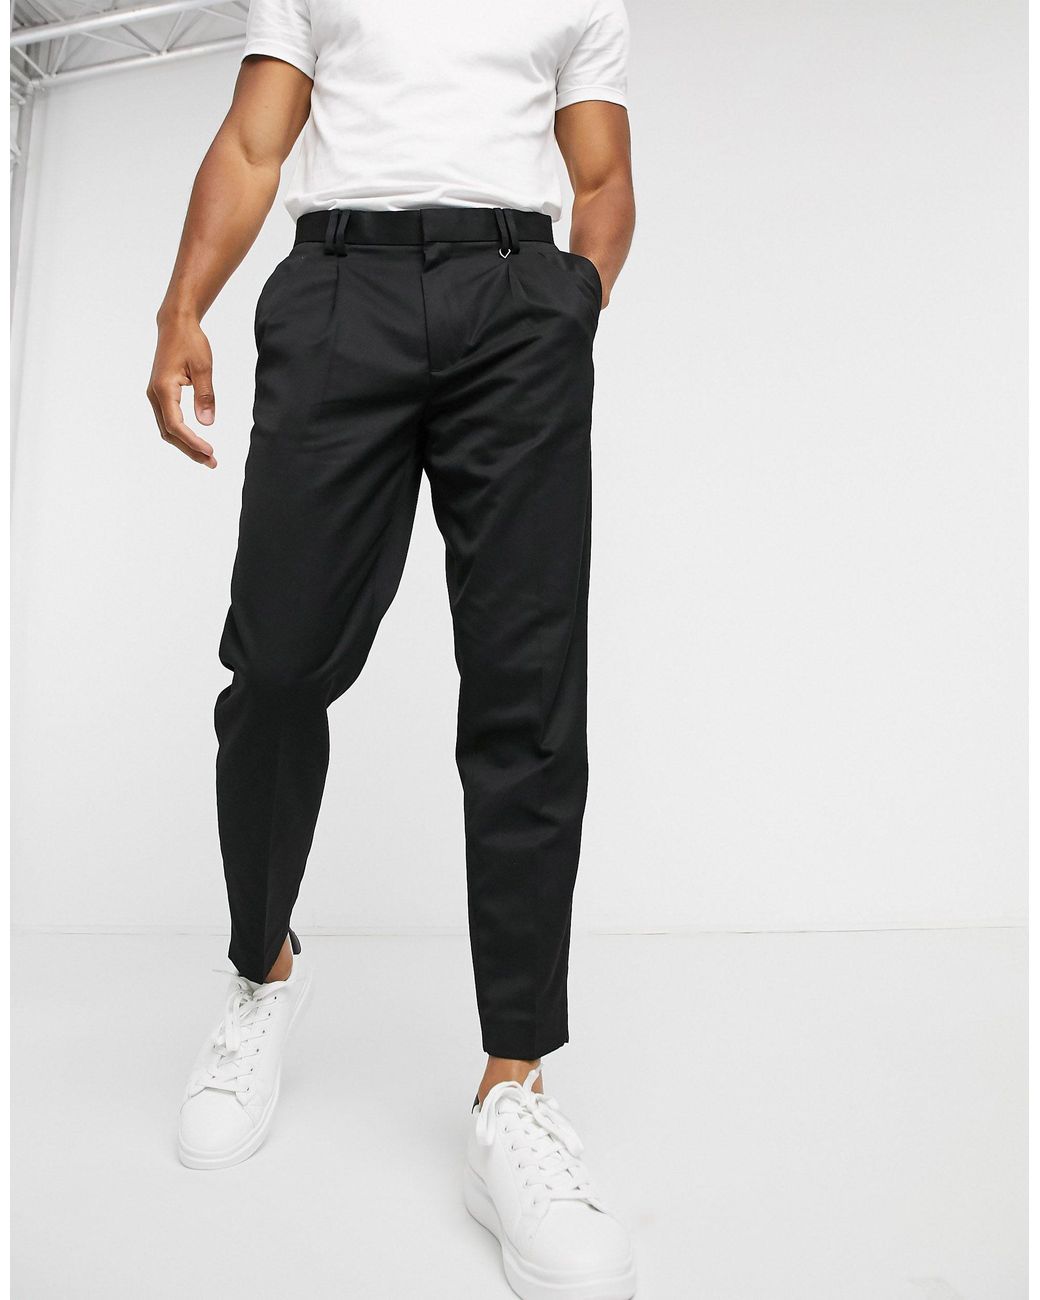 Buy Checked Tapered Fit Trousers Online at Best Prices in India  JioMart